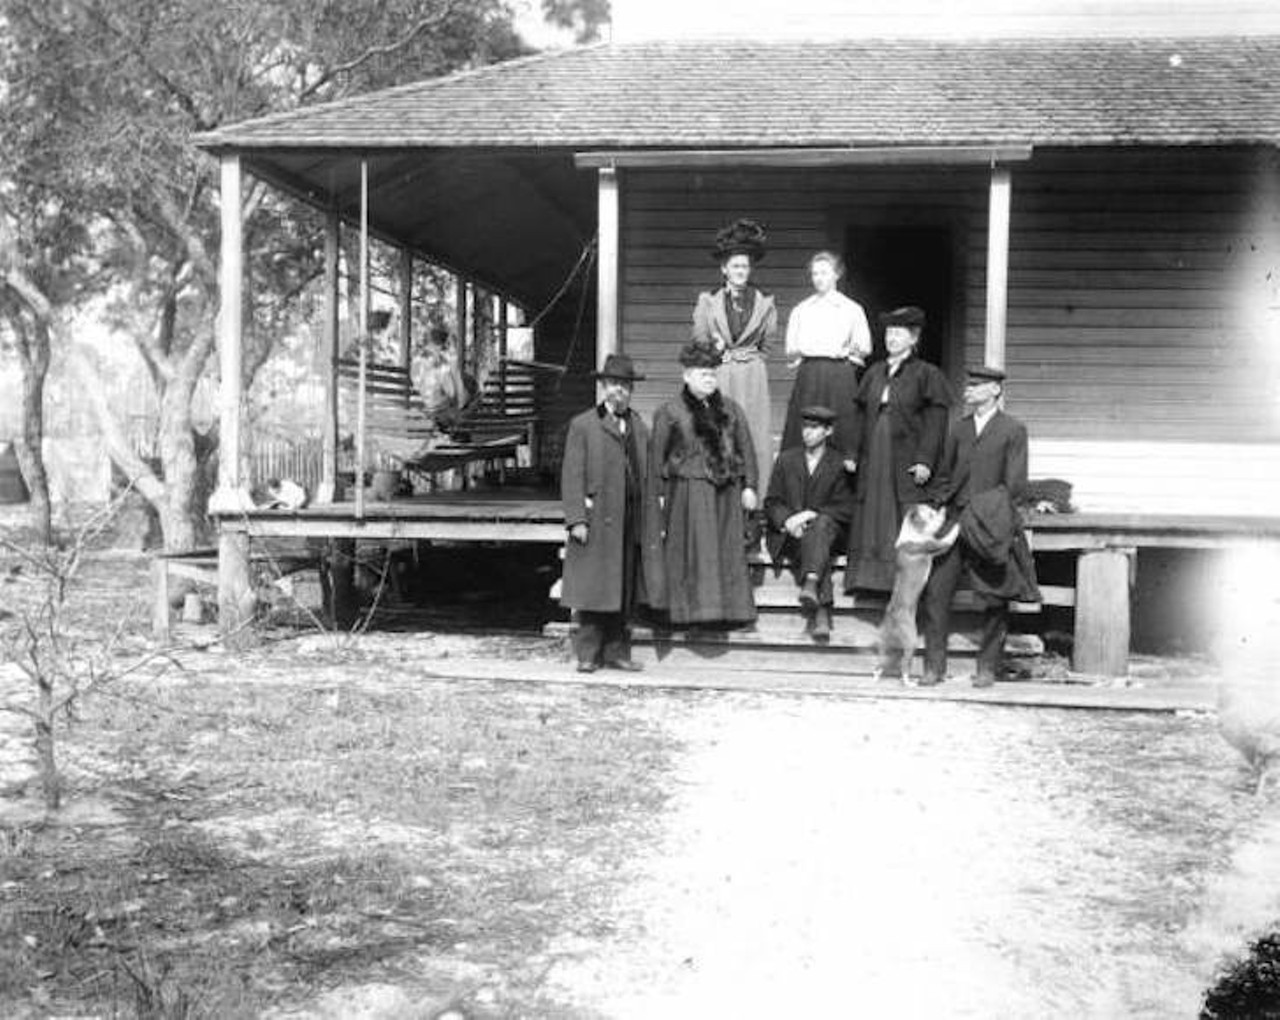 Saying goodby to Iowa friends in Eastpoint, taken sometime between 1898 to 1912.